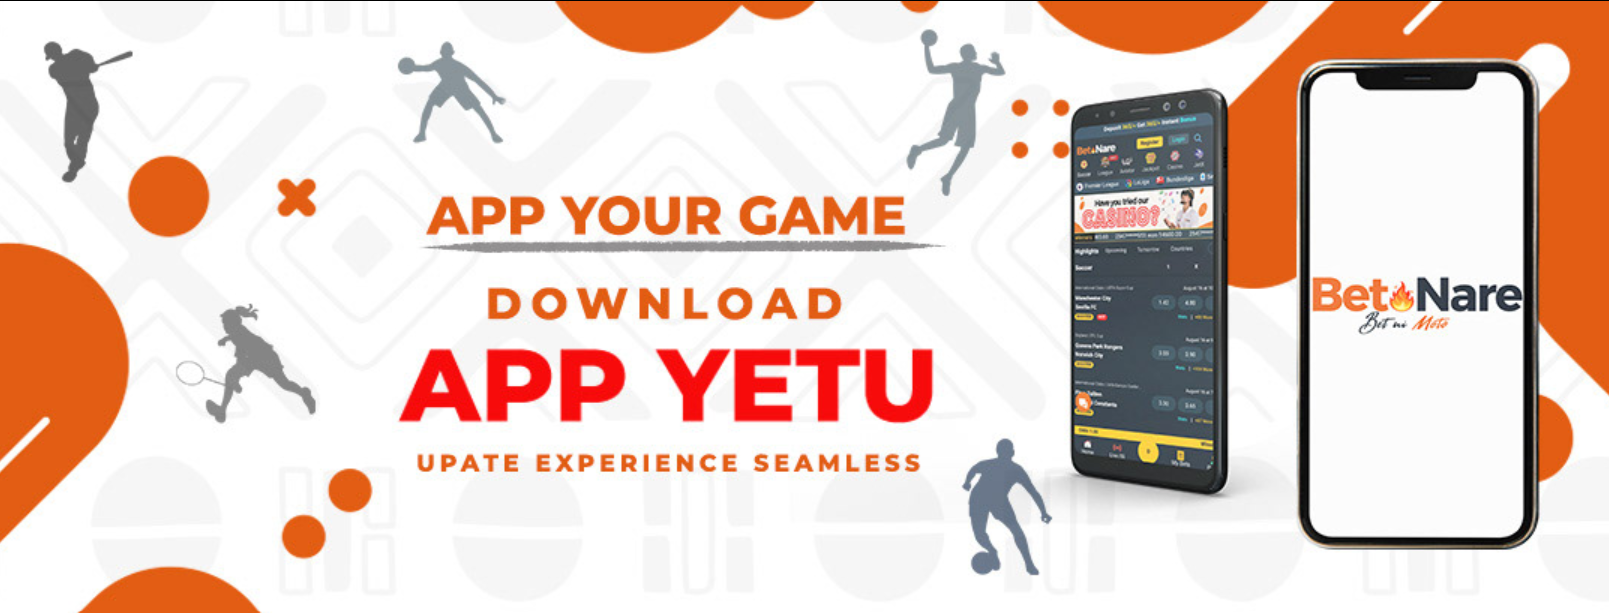 X APP YOUR GAME
DOWNLOAD

A. APP YETU

| oN
© UPATE EXPERIENCE SEAMLESS t 2

 

A